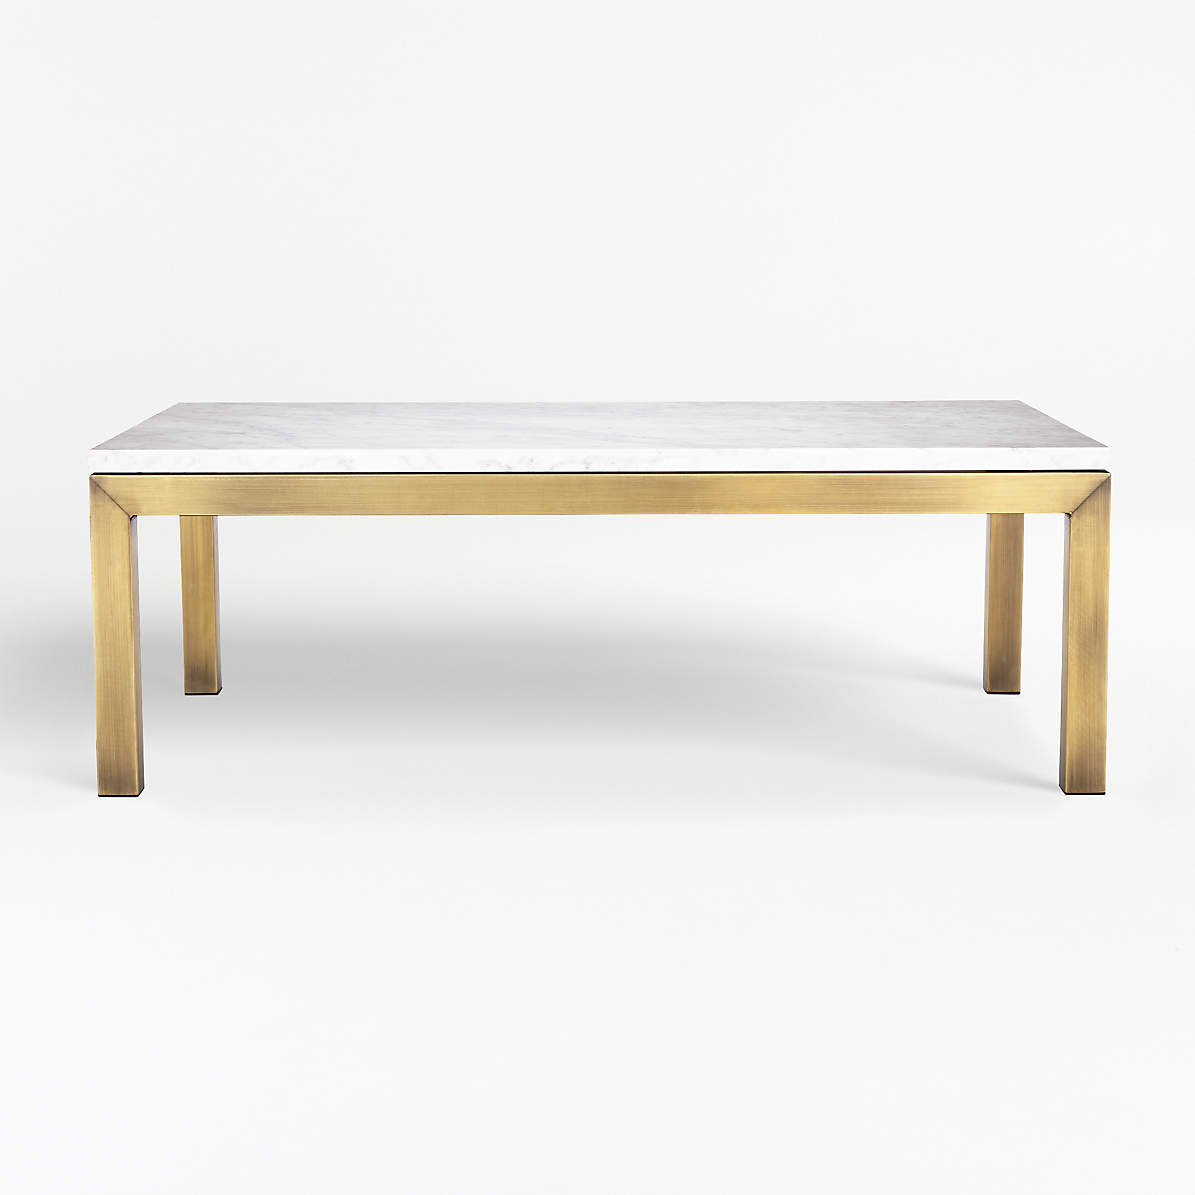 Parsons White Marble Top Brass Base 48x28 Small Rectangular Coffee Table Reviews Crate And Barrel